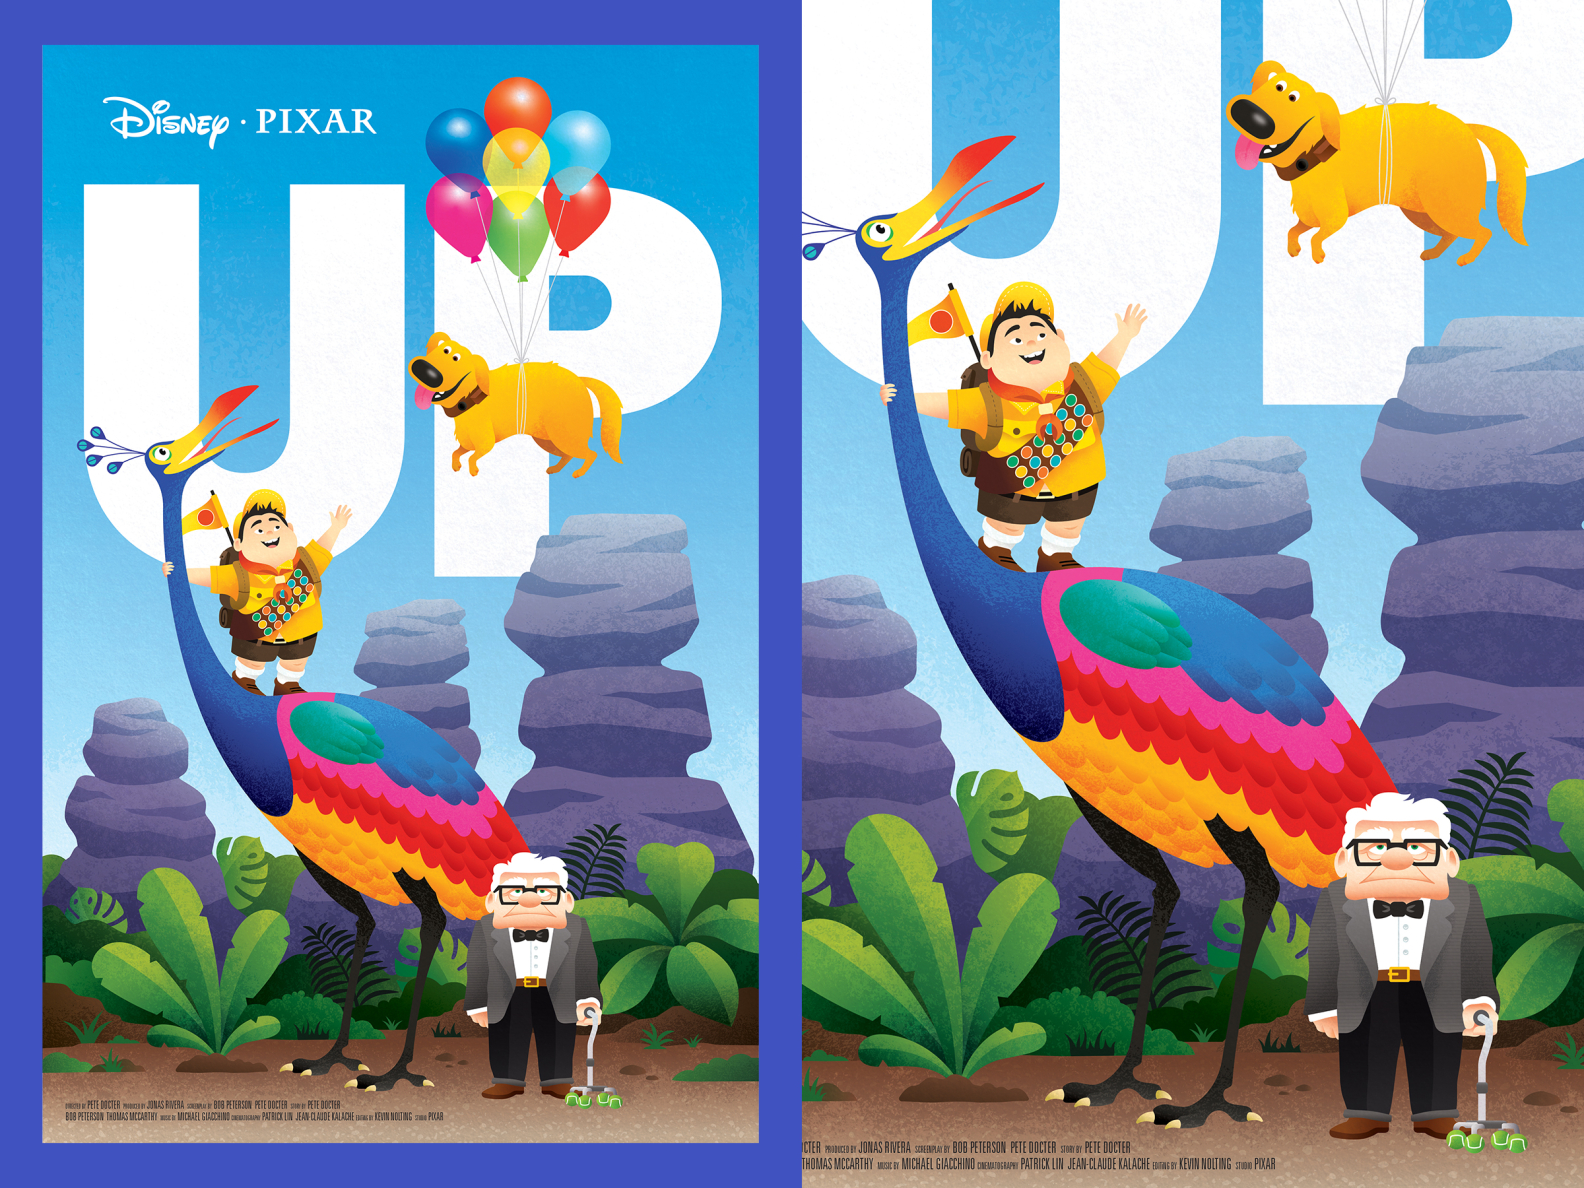 UP Movie Poster by Cristina Moore on Dribbble